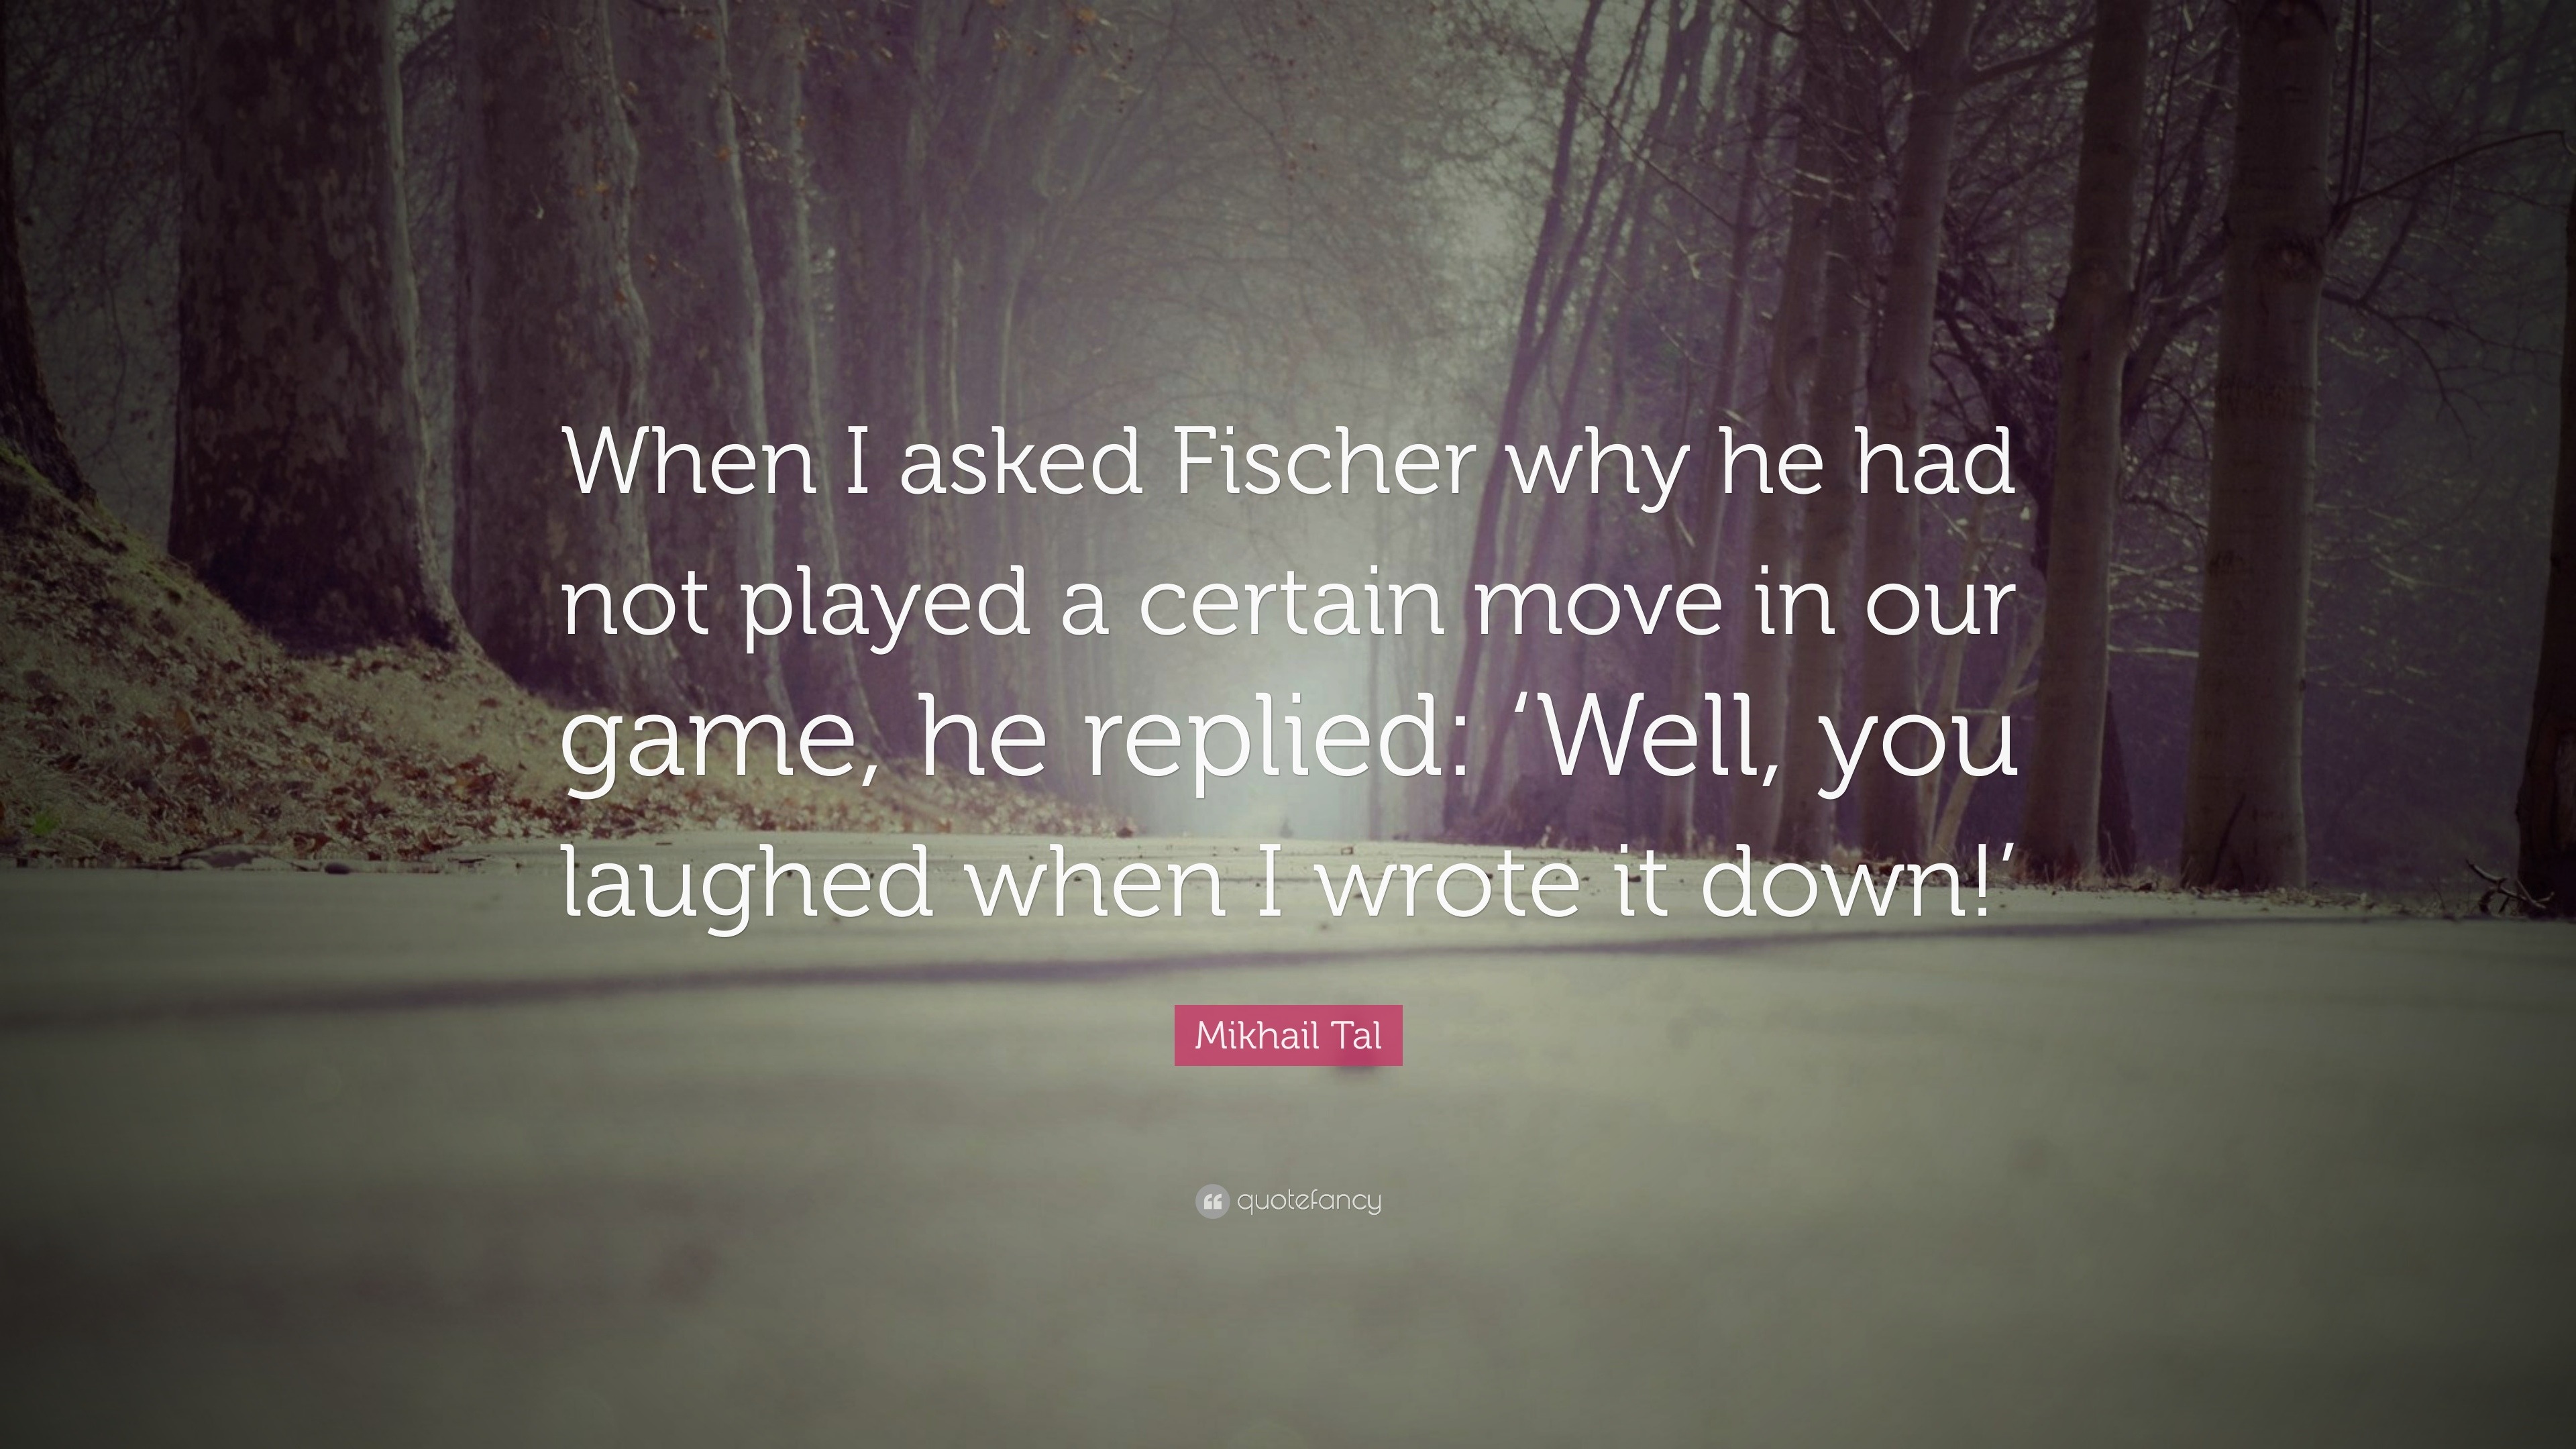 Mikhail Tal Quote: “When I asked Fischer why he had not played a certain  move in our game, he replied: 'Well, you laughed when I wrote it do”